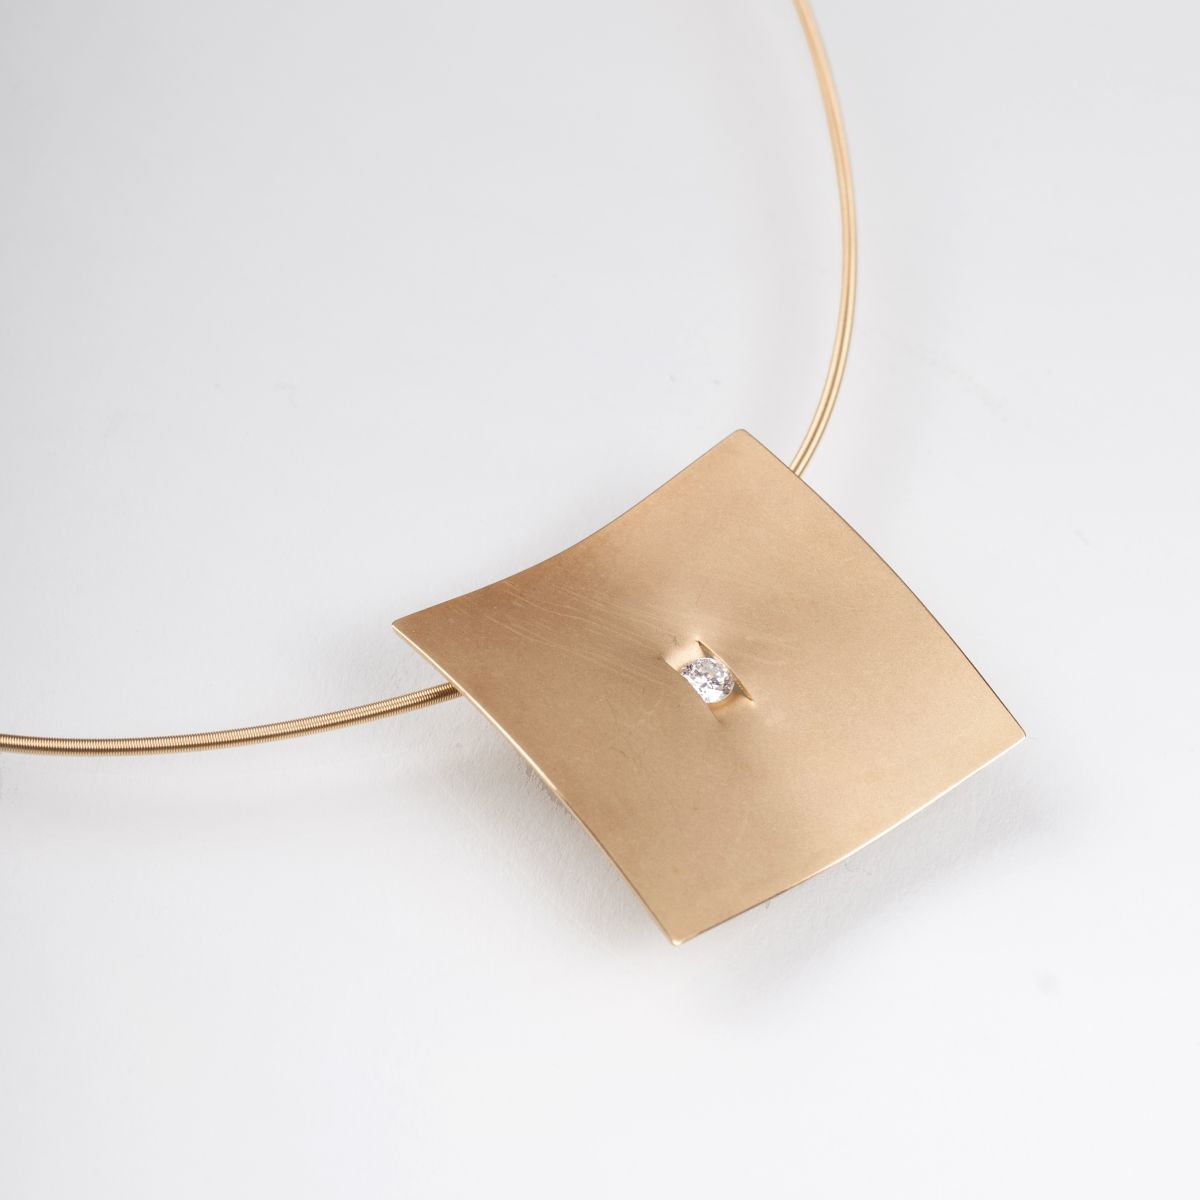 A golden necklace with solitaire pendant